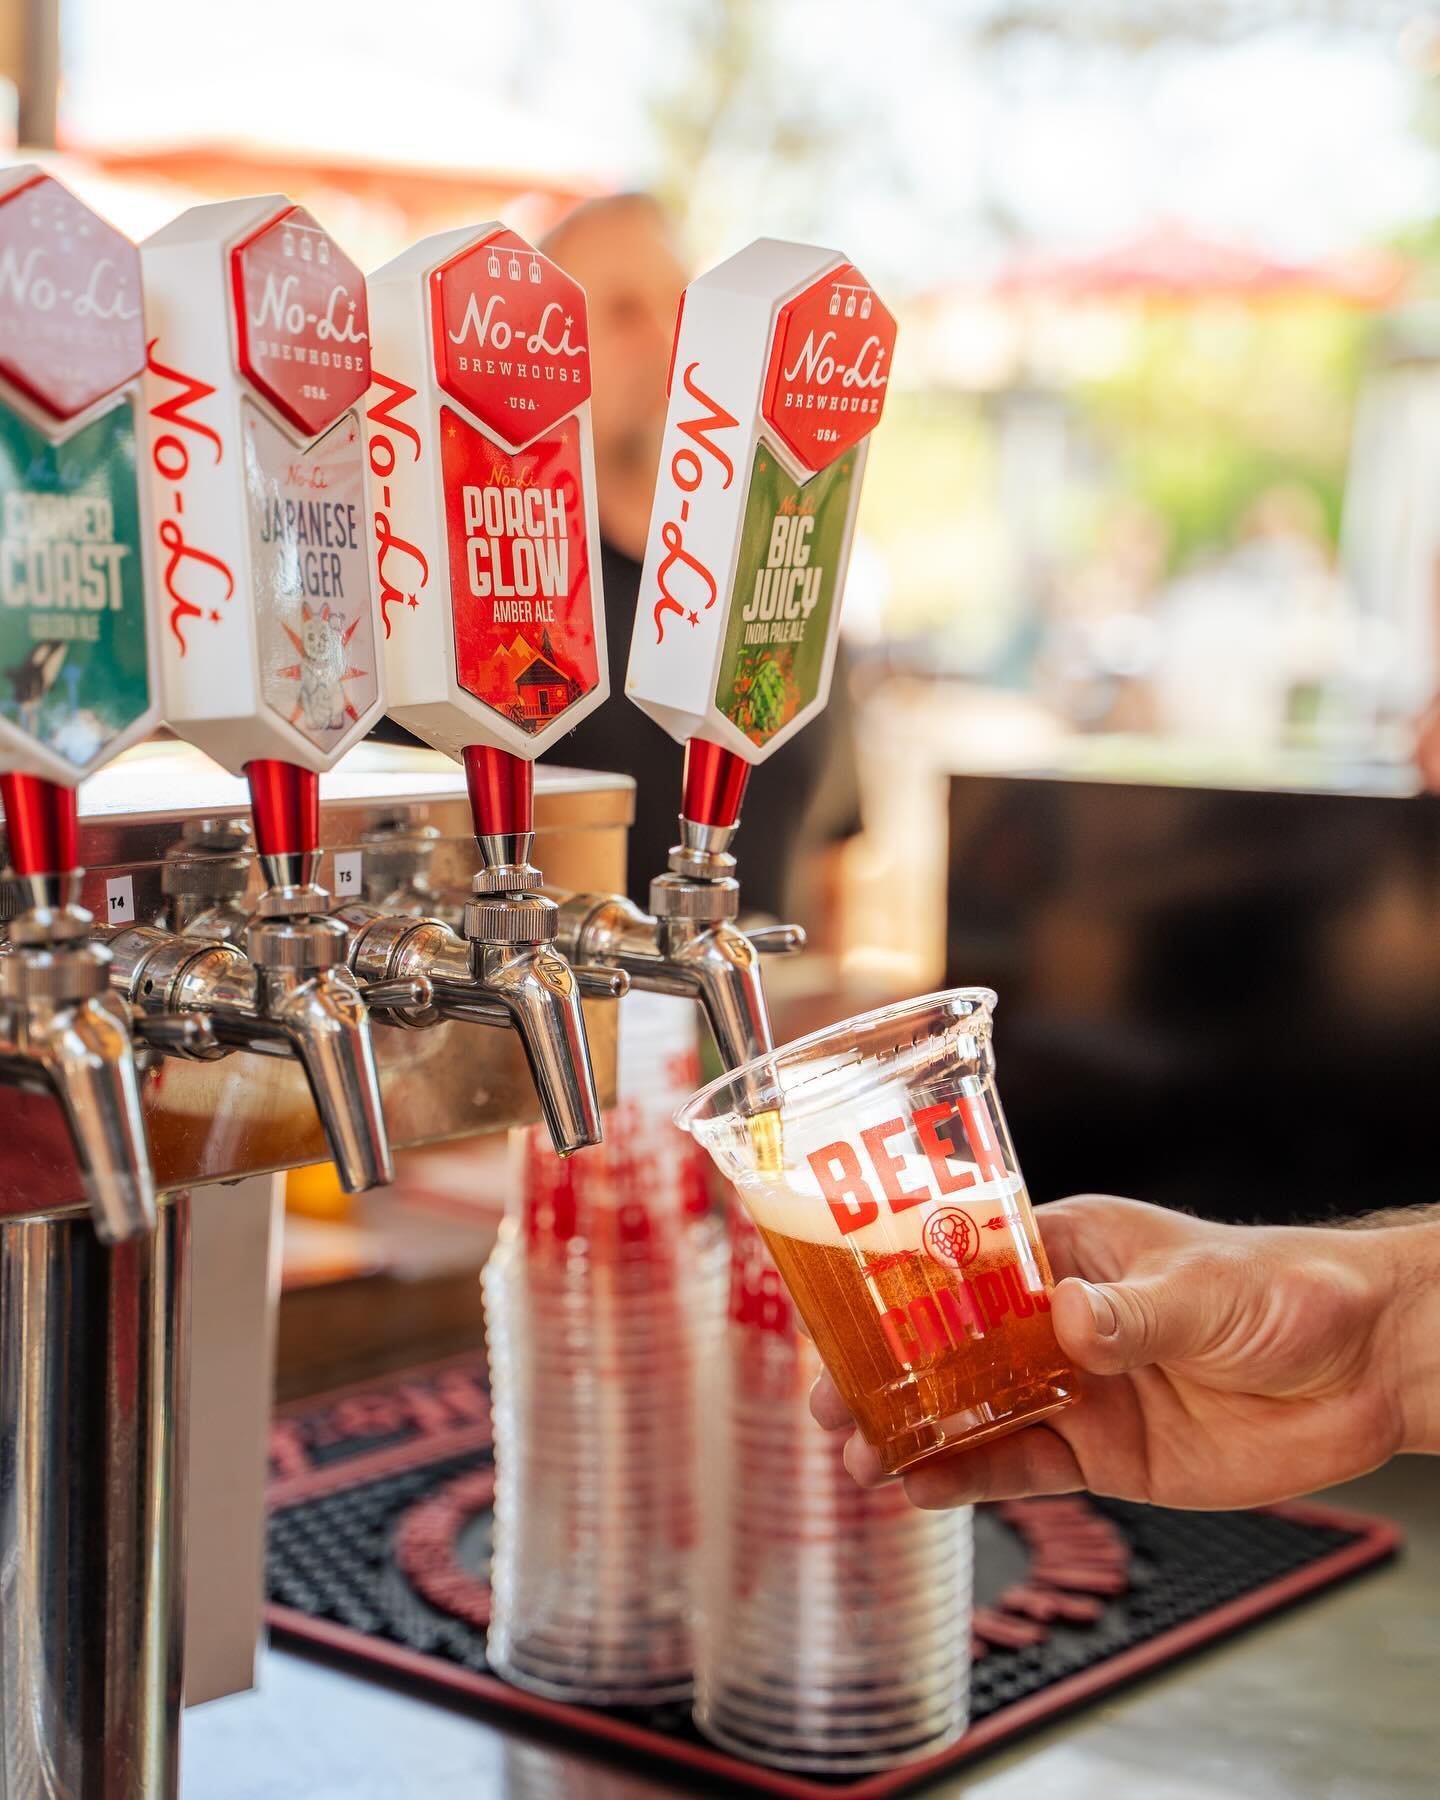 Patio season is here! 🍻

Join us for a cold pint &amp; catch some rays on the No-Li Riverside Patio ☀️ 

🚨Full food menu now available across the entire Beer Campus!